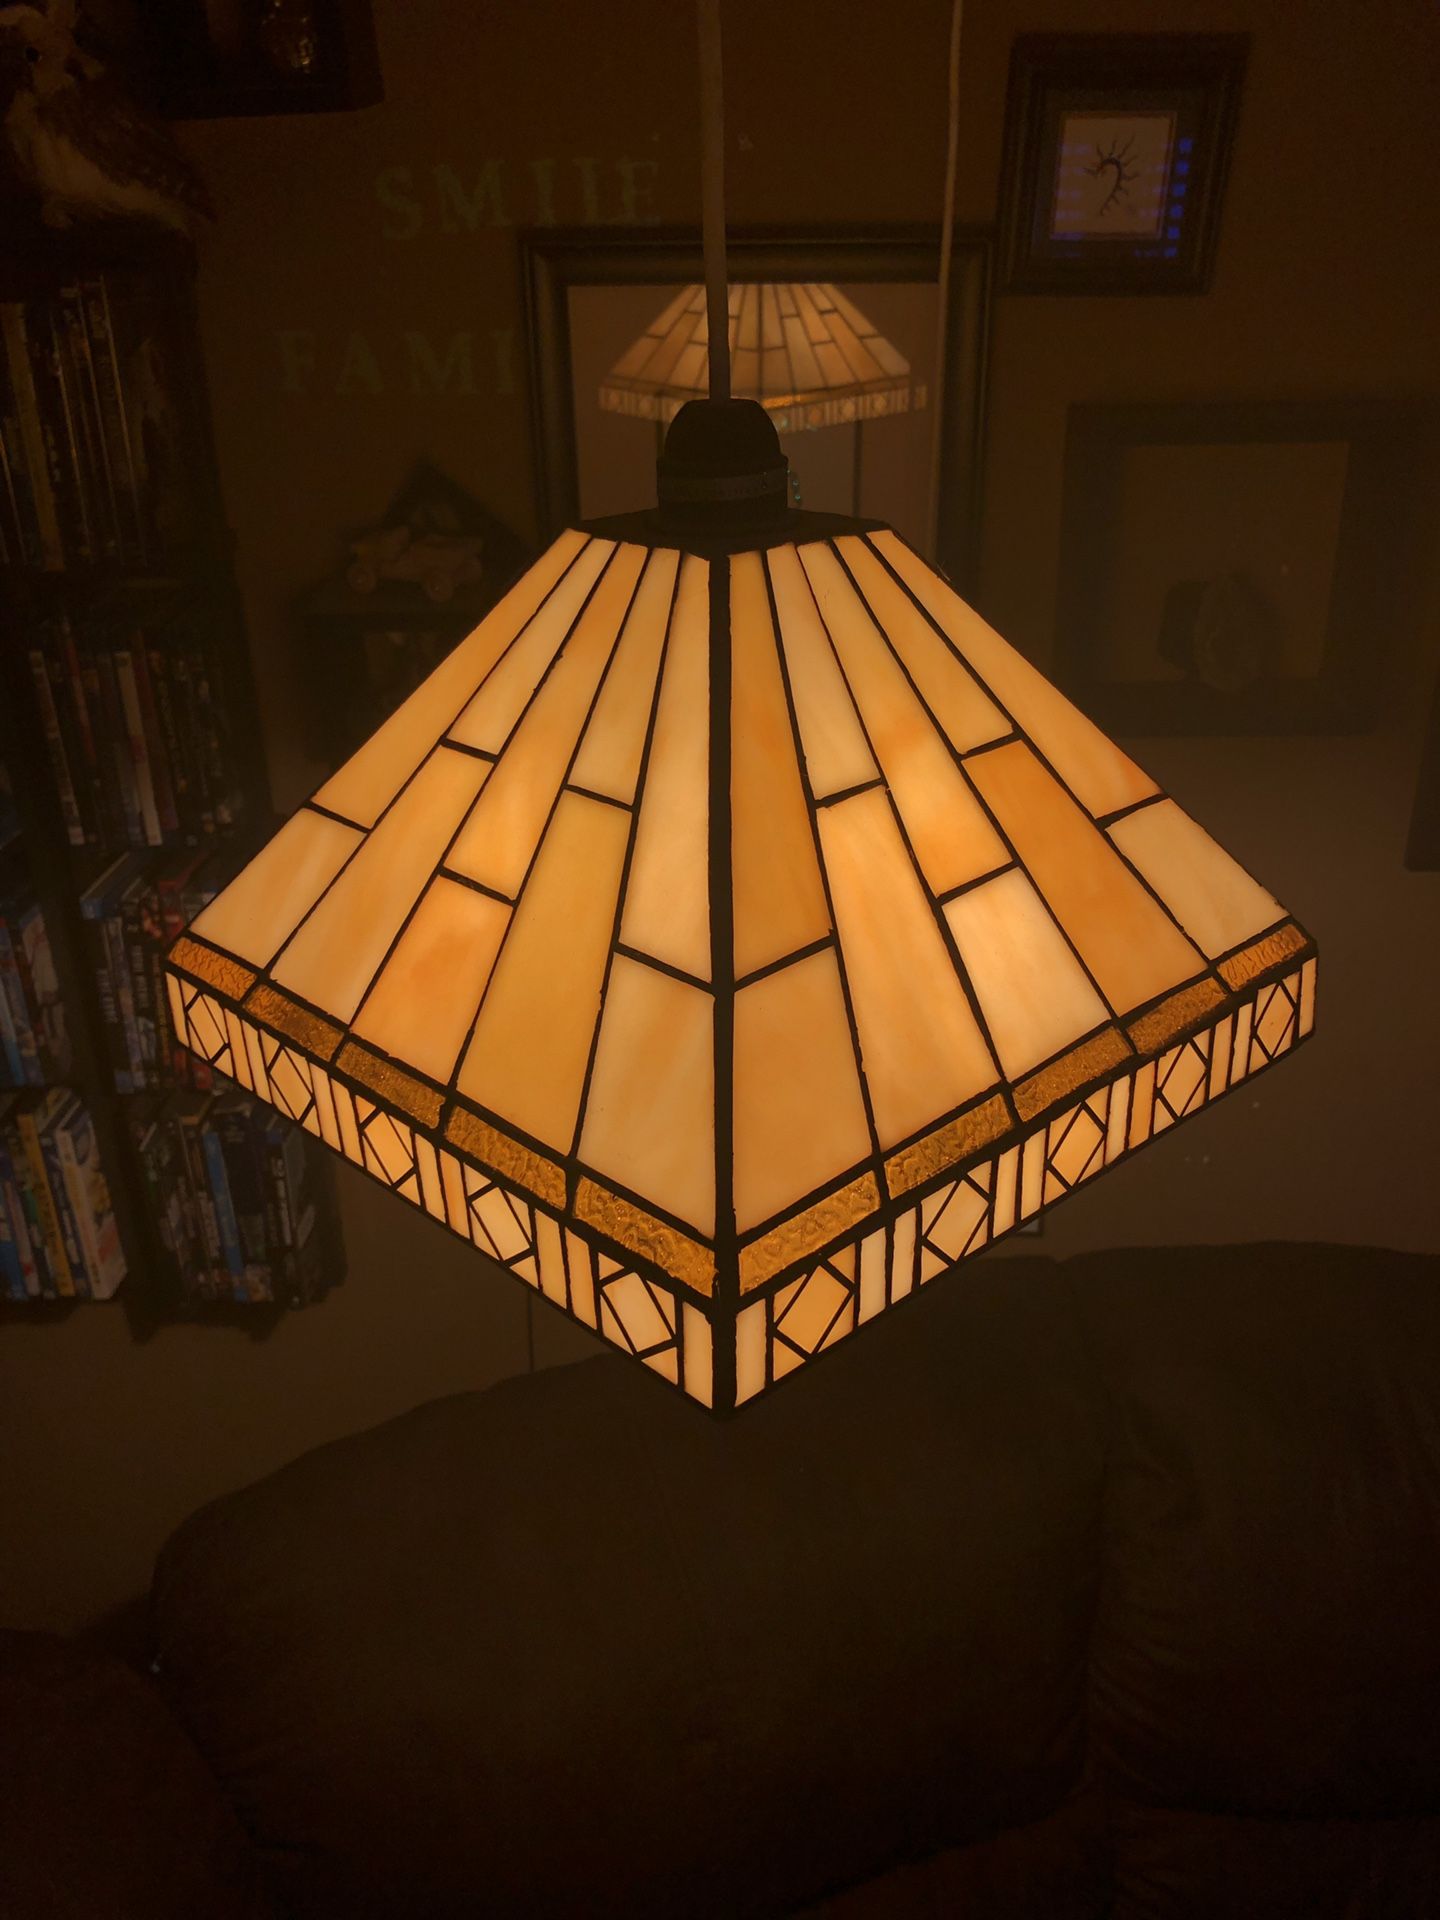 Hanging stained glass lamp